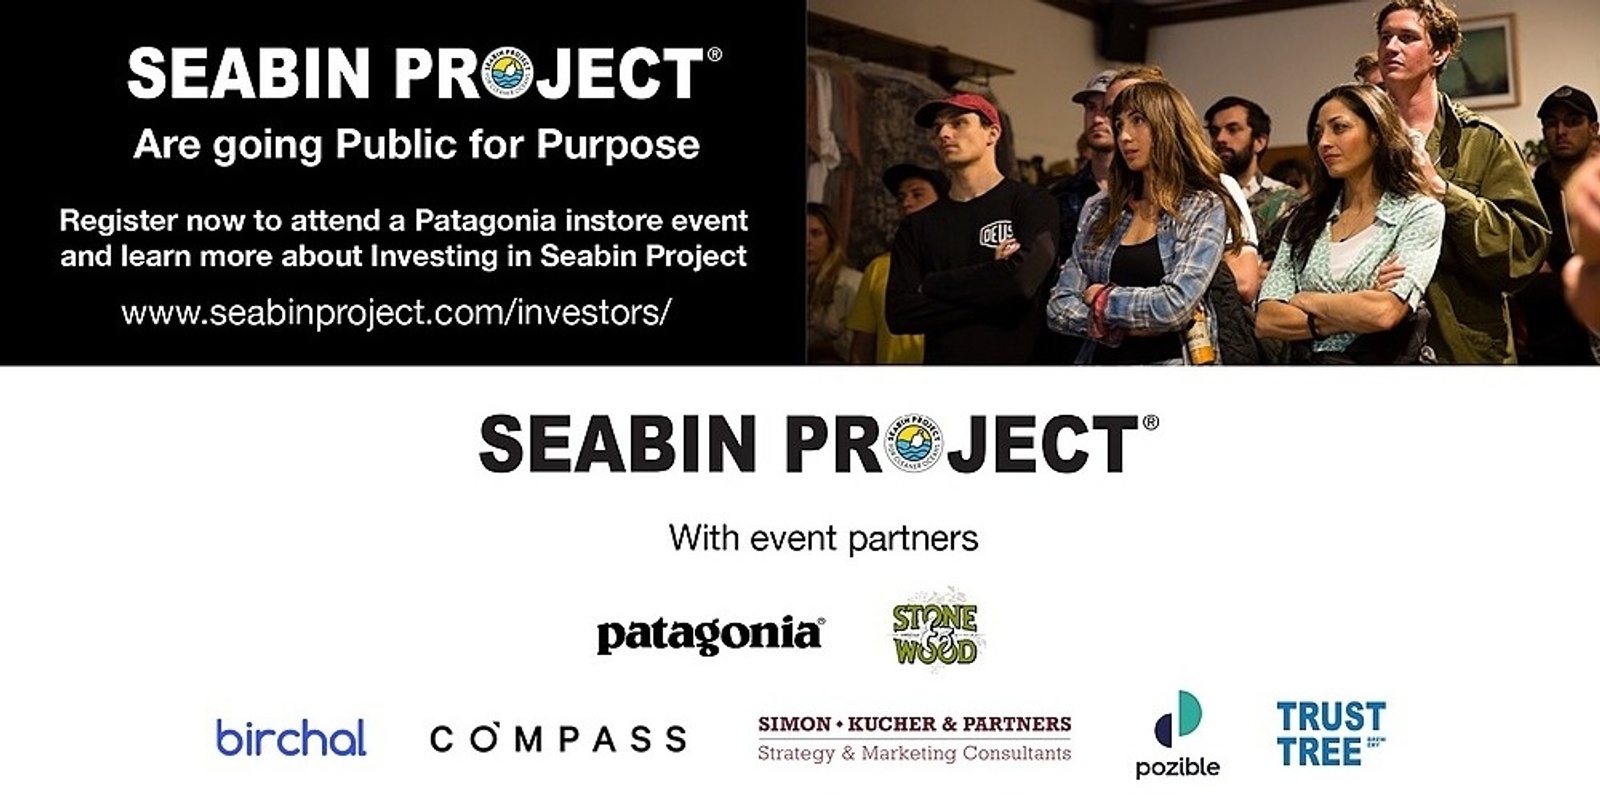 Banner image for Seabin Project - Sydney CBD - Going Public For Purpose